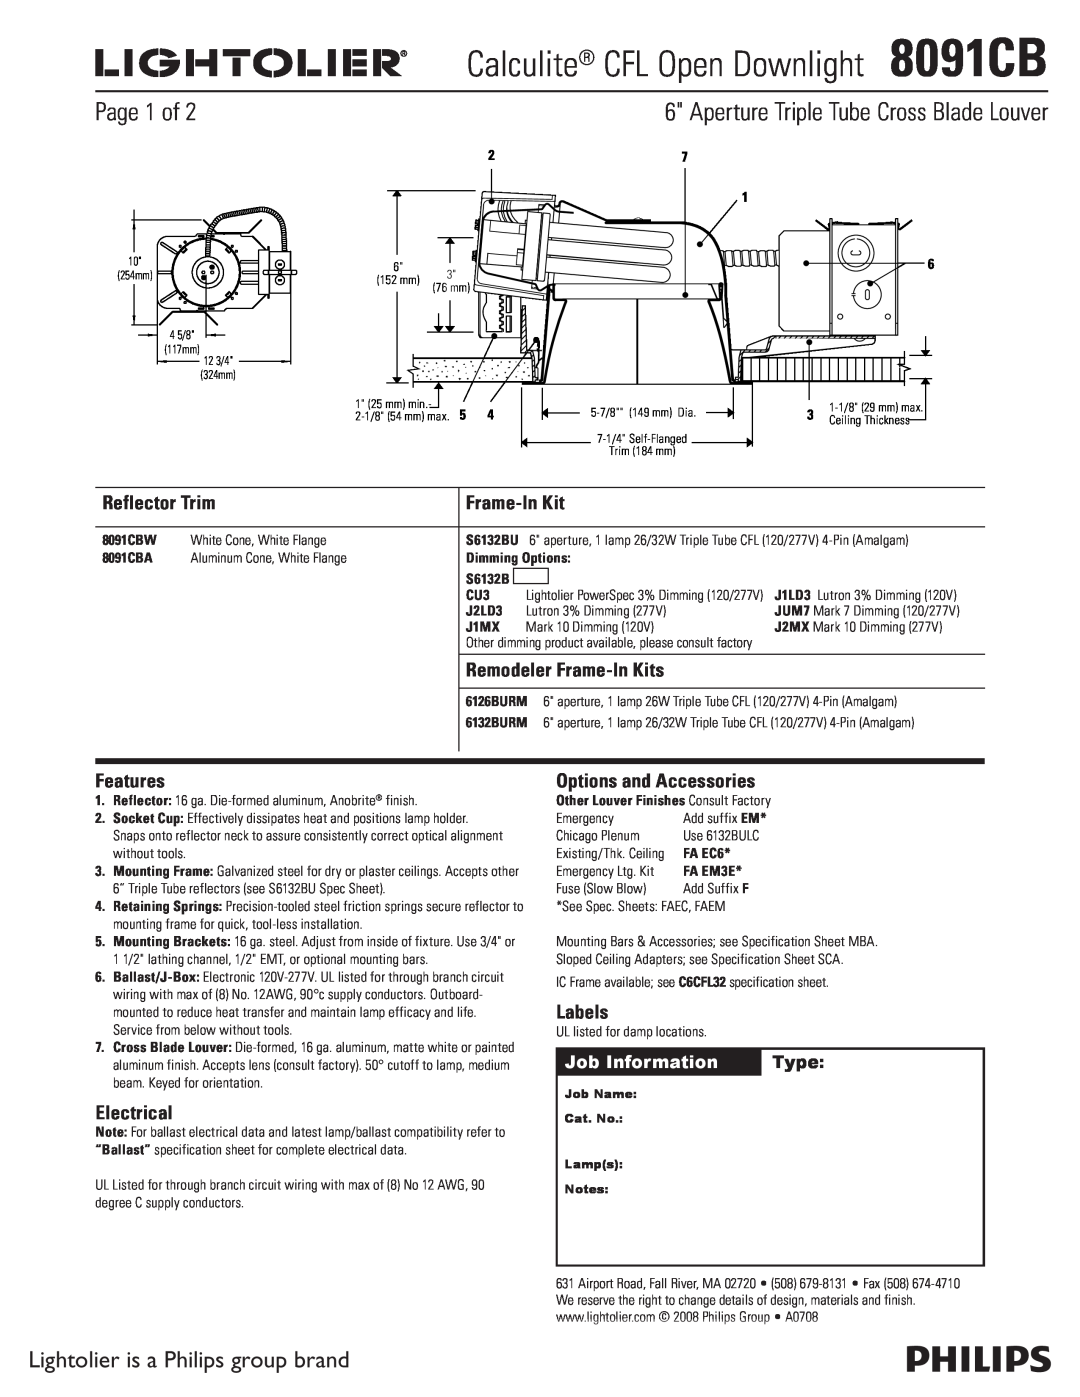 Lightolier 8091CB specifications Aperture Triple Tube Cross Blade Louver, Page 1 of, Lightolier is a Philips group brand 